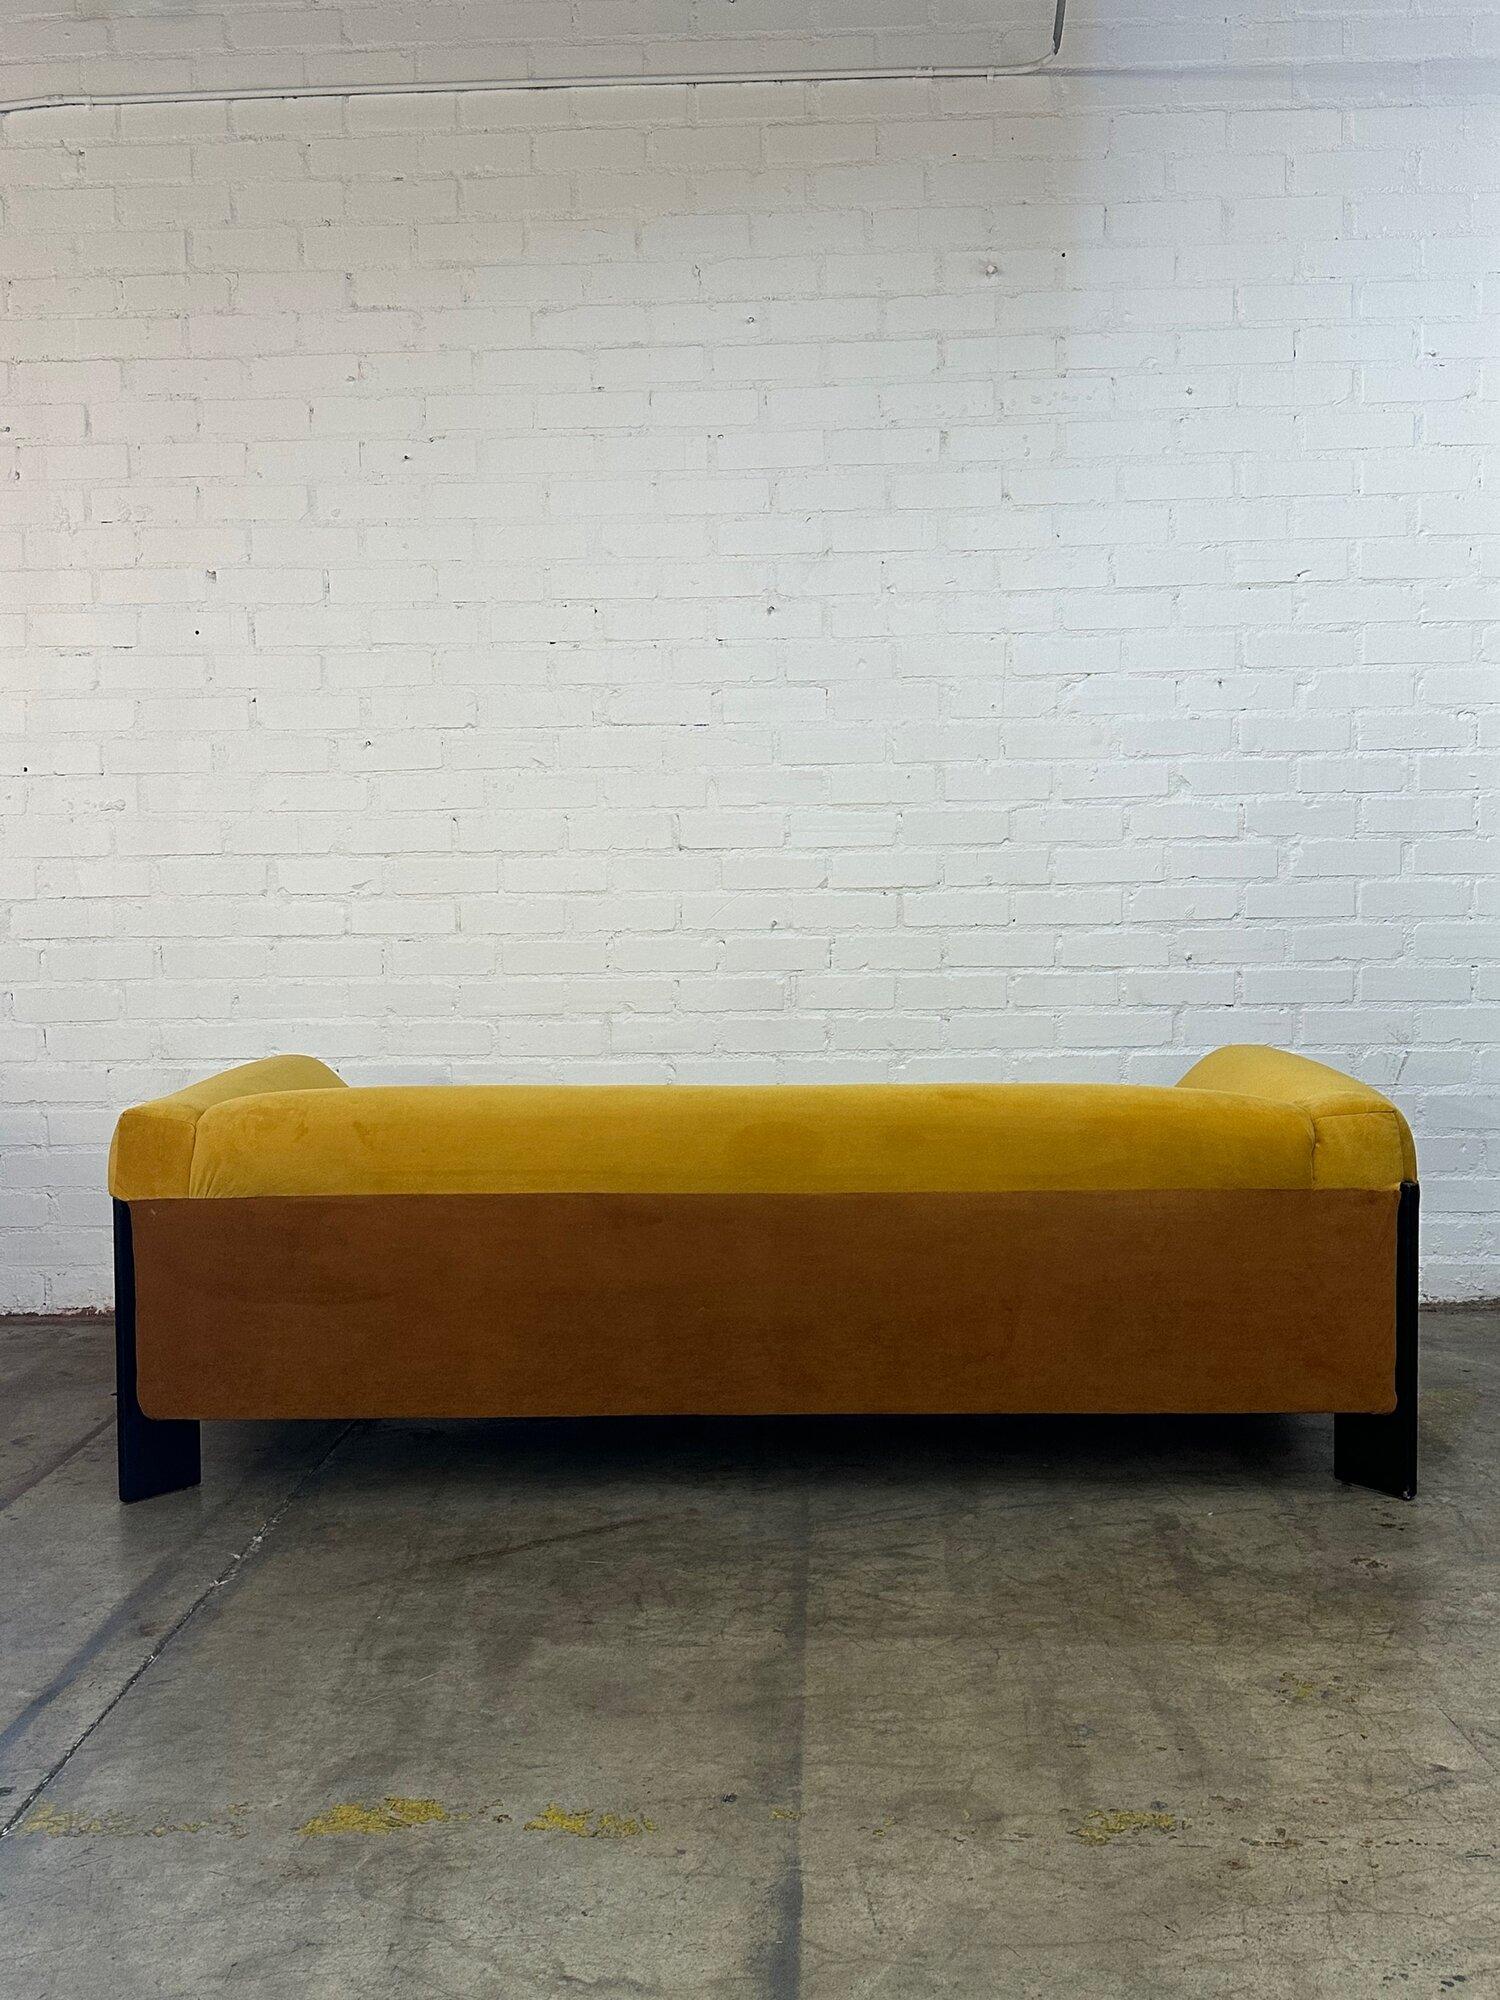 American 70s Retro Style “Open Arms Sofa” - AS IS